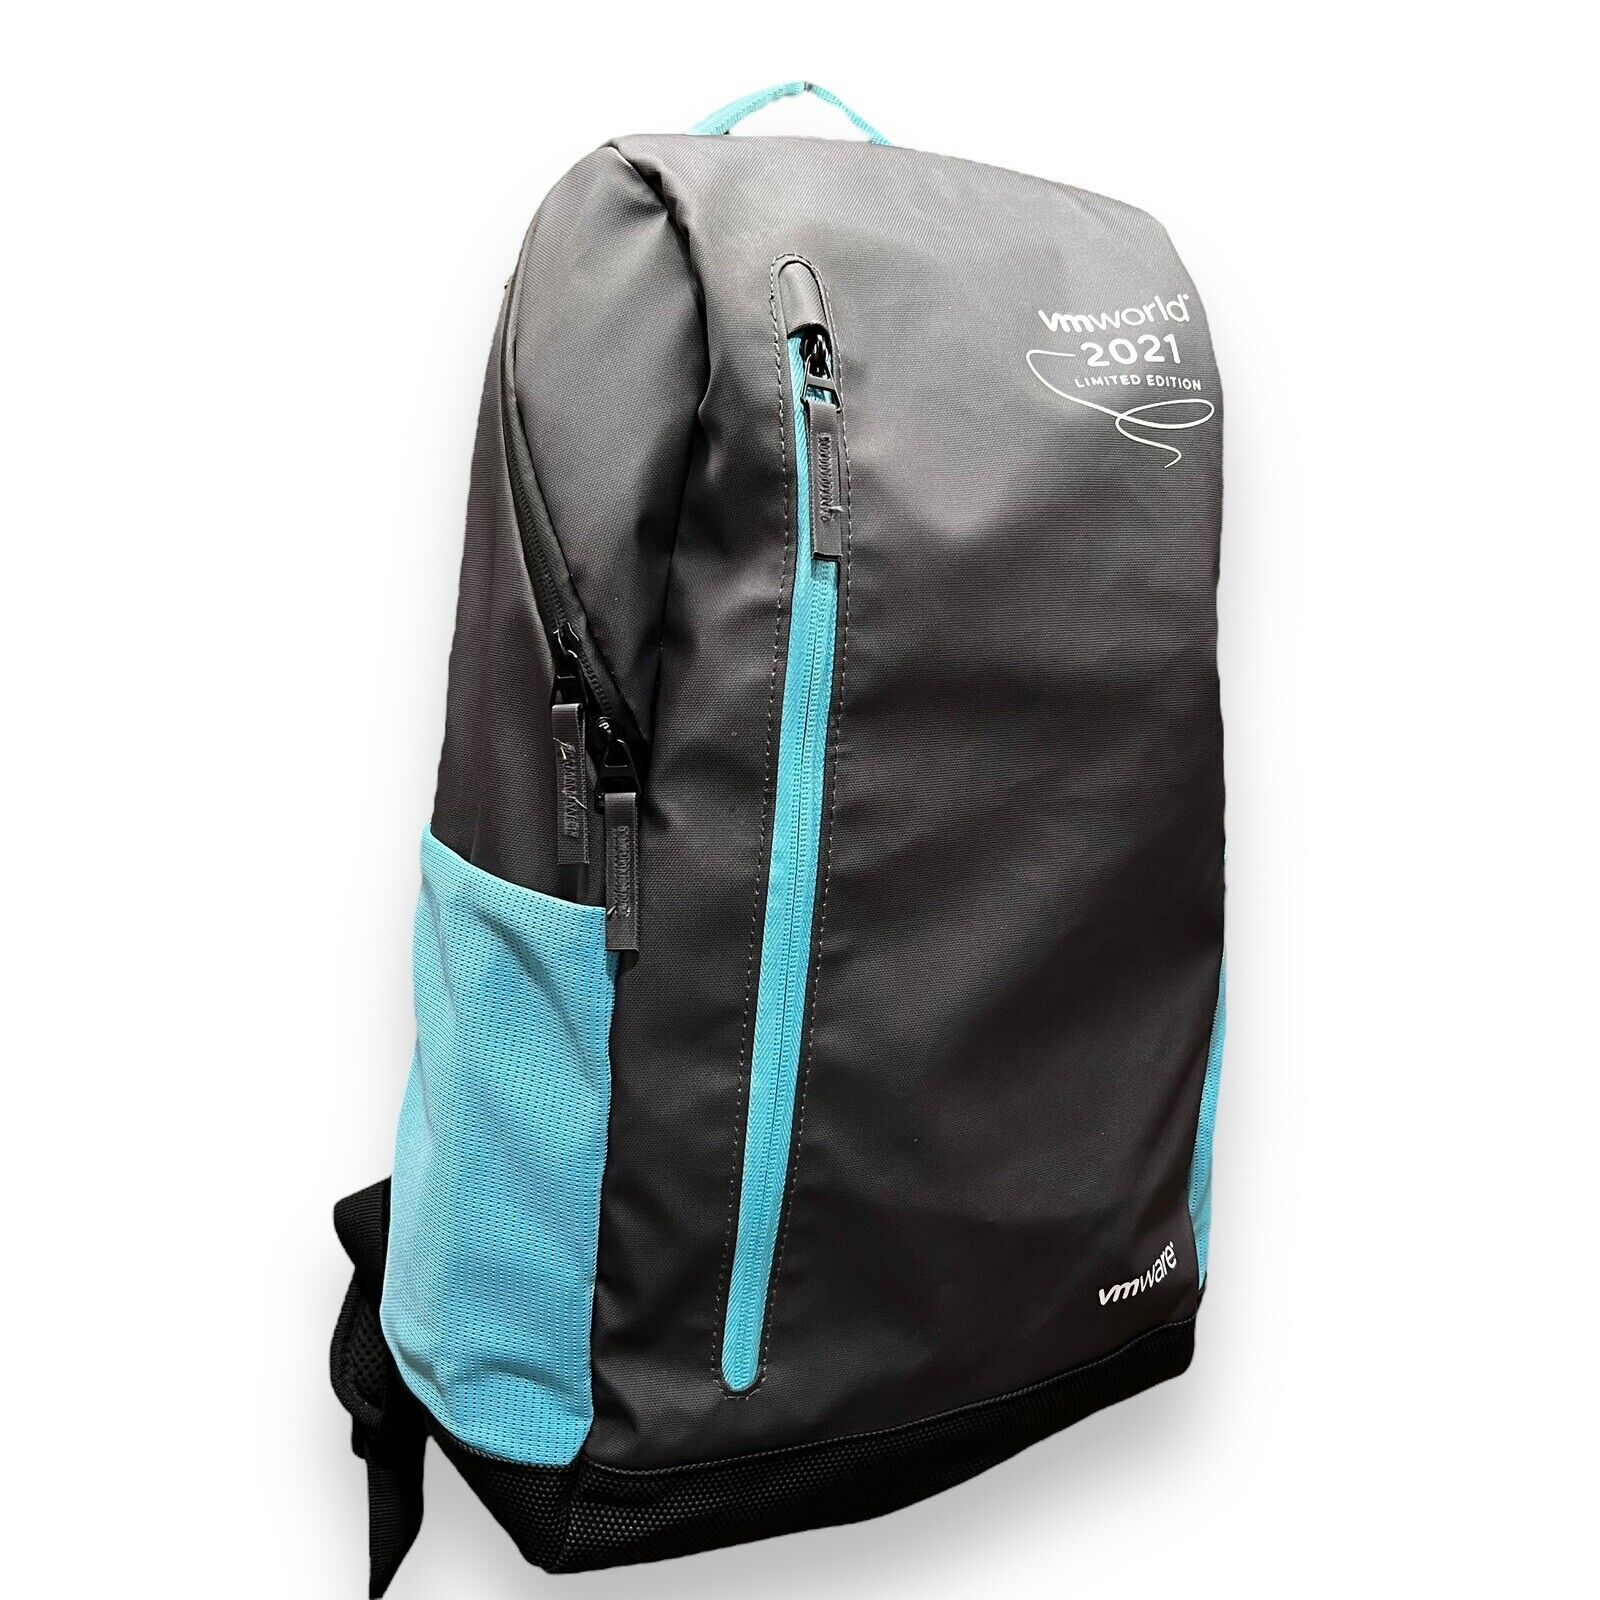 VMworld 2021 Limited Edition Backpack *New*  Laptop School Work